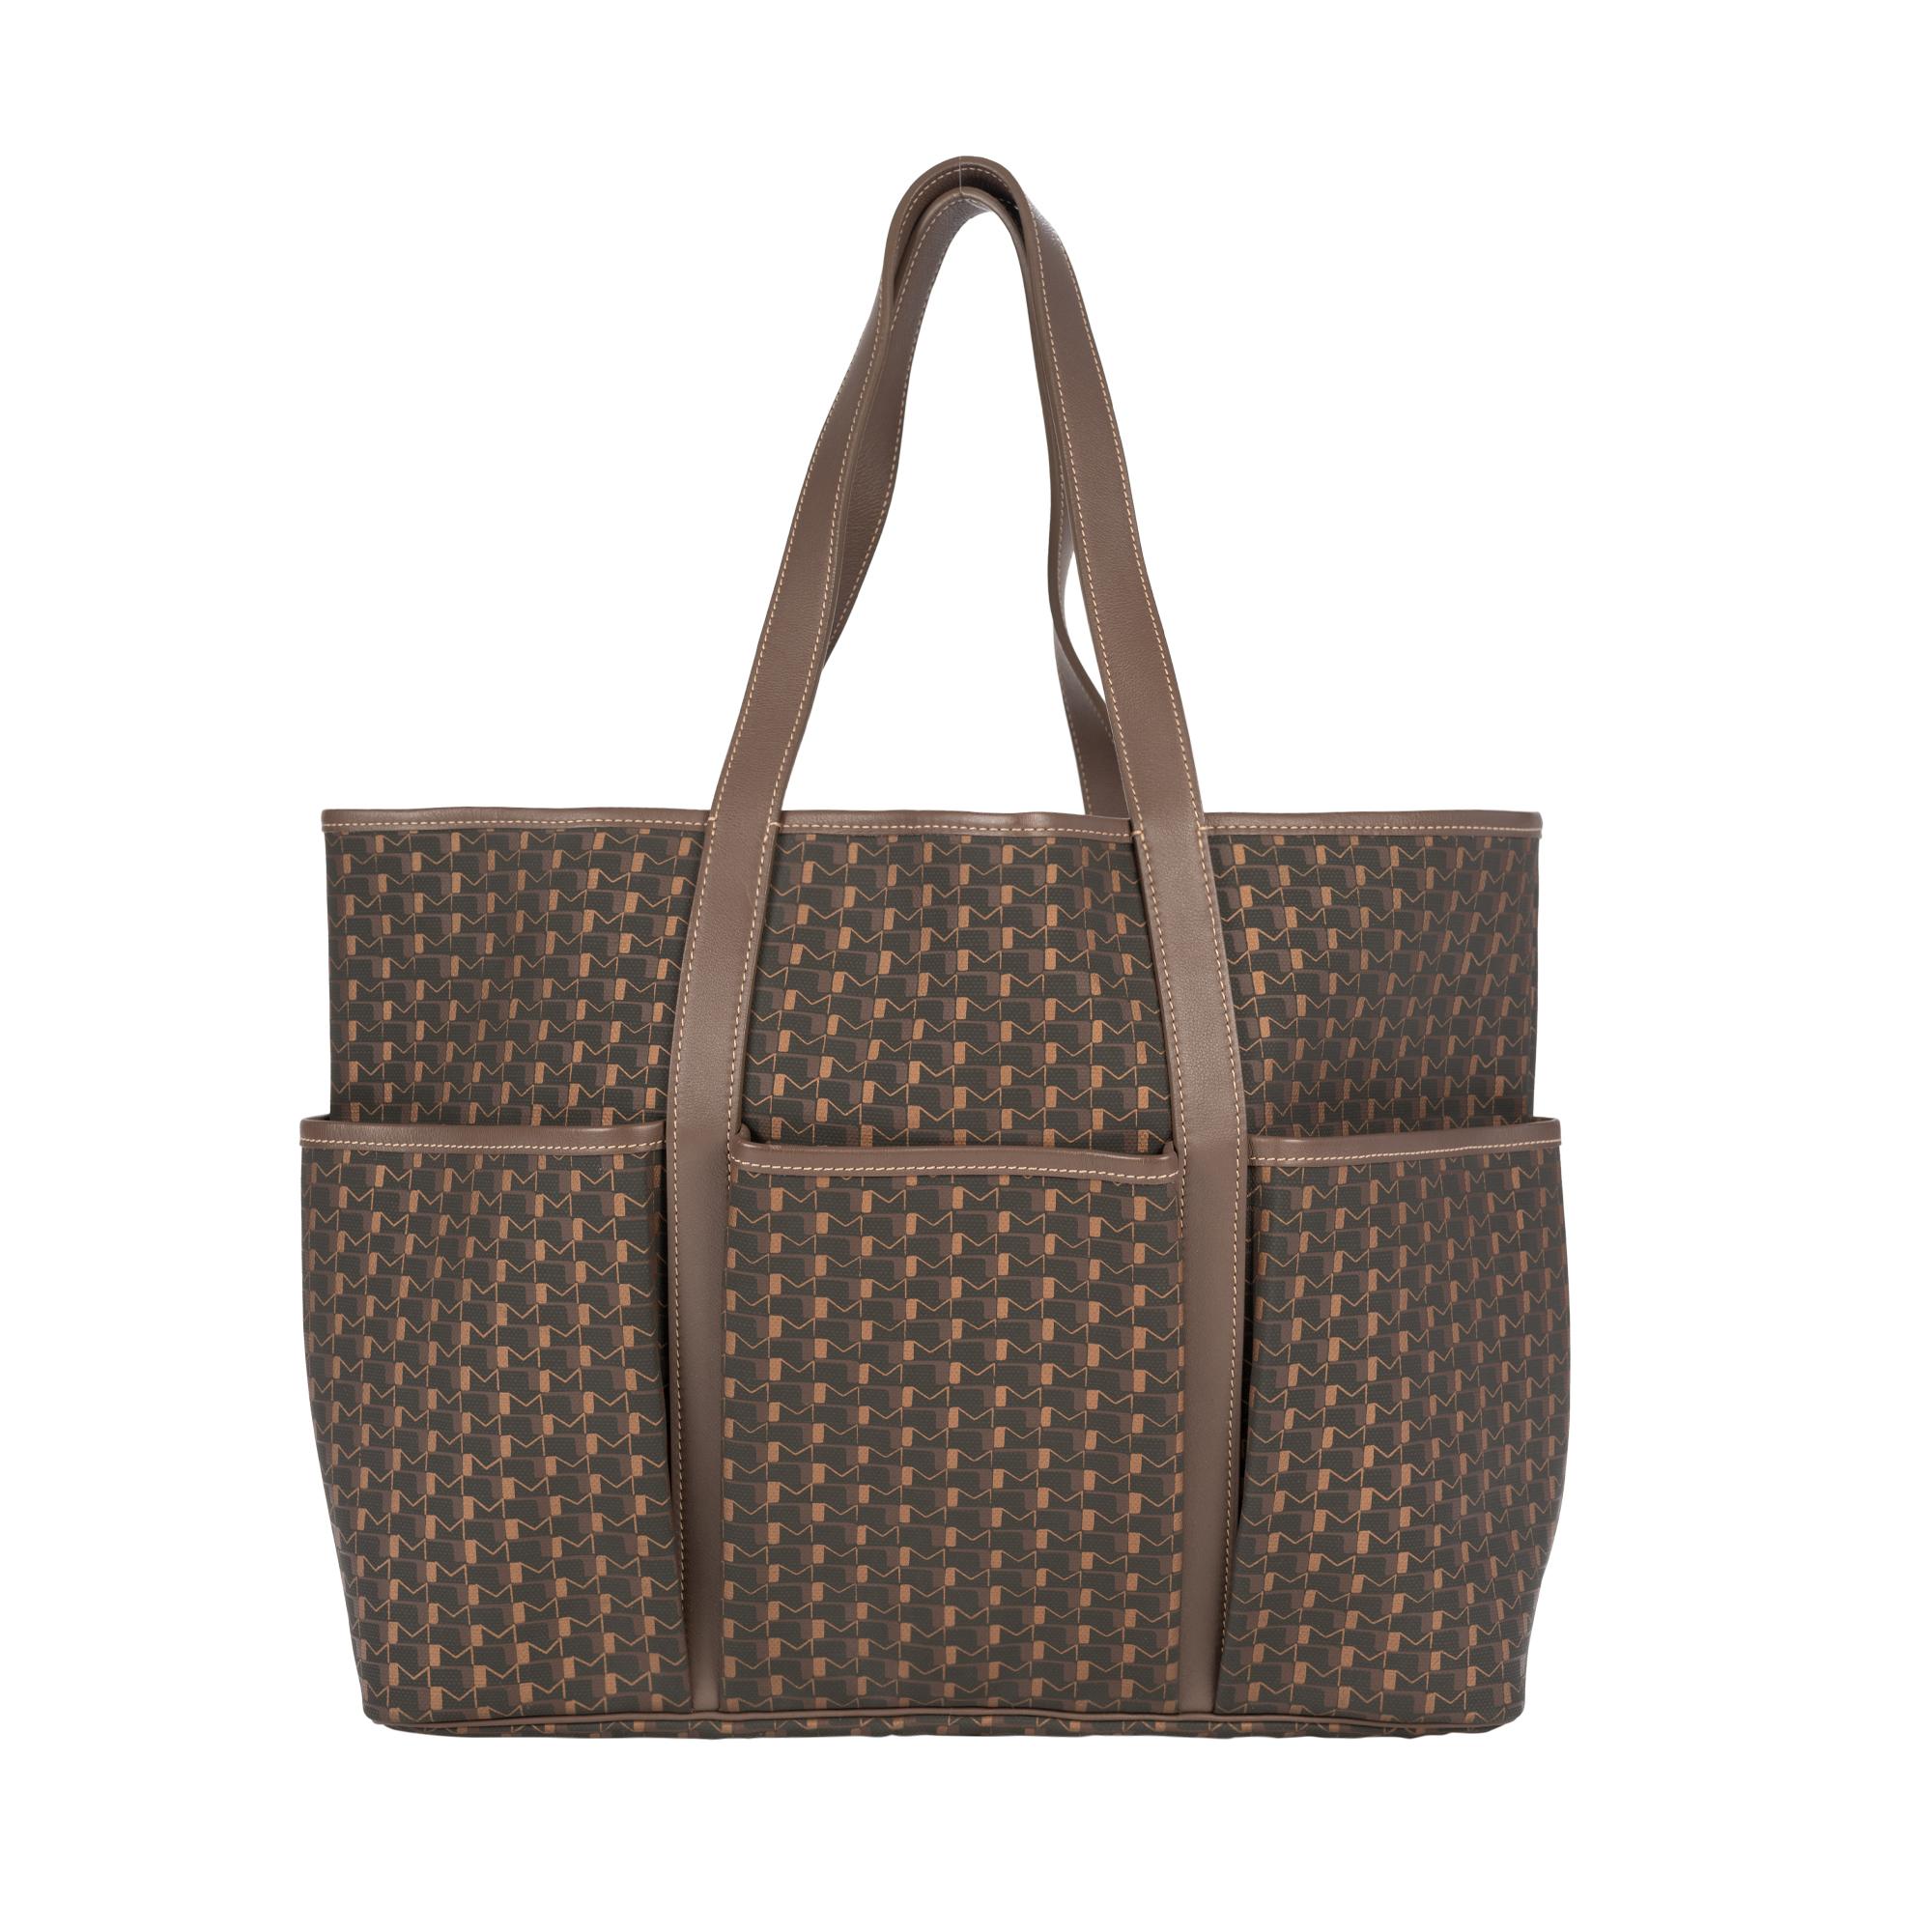 Moynat Tote in Monogram canvas and taupe leather in brown/grey and bronze canvas for a shoulder or hand.
Signature: 